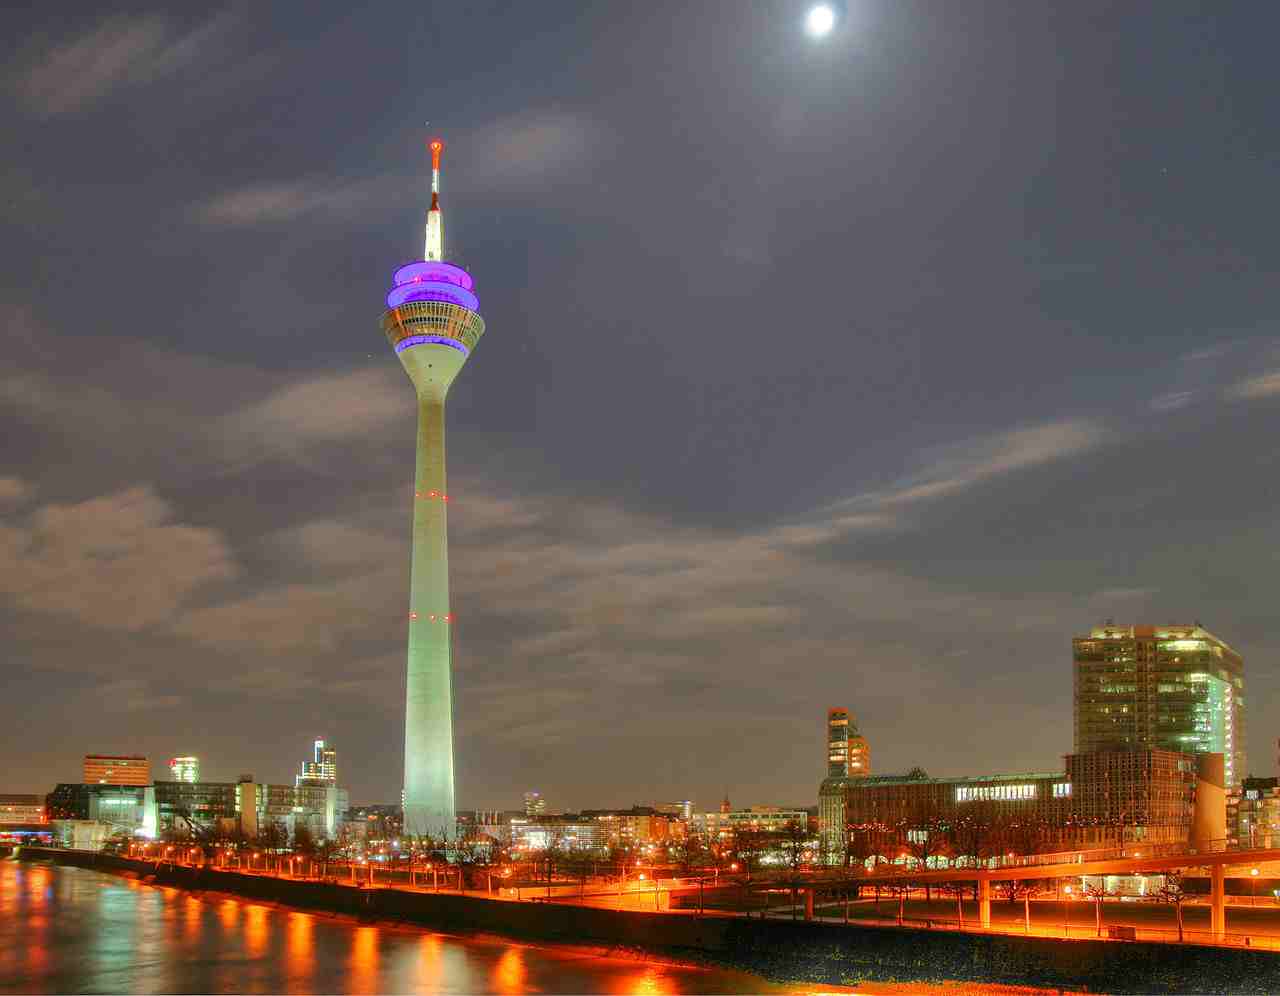 The Rhine Tower is one of the most beautiful places in Dusseldorf